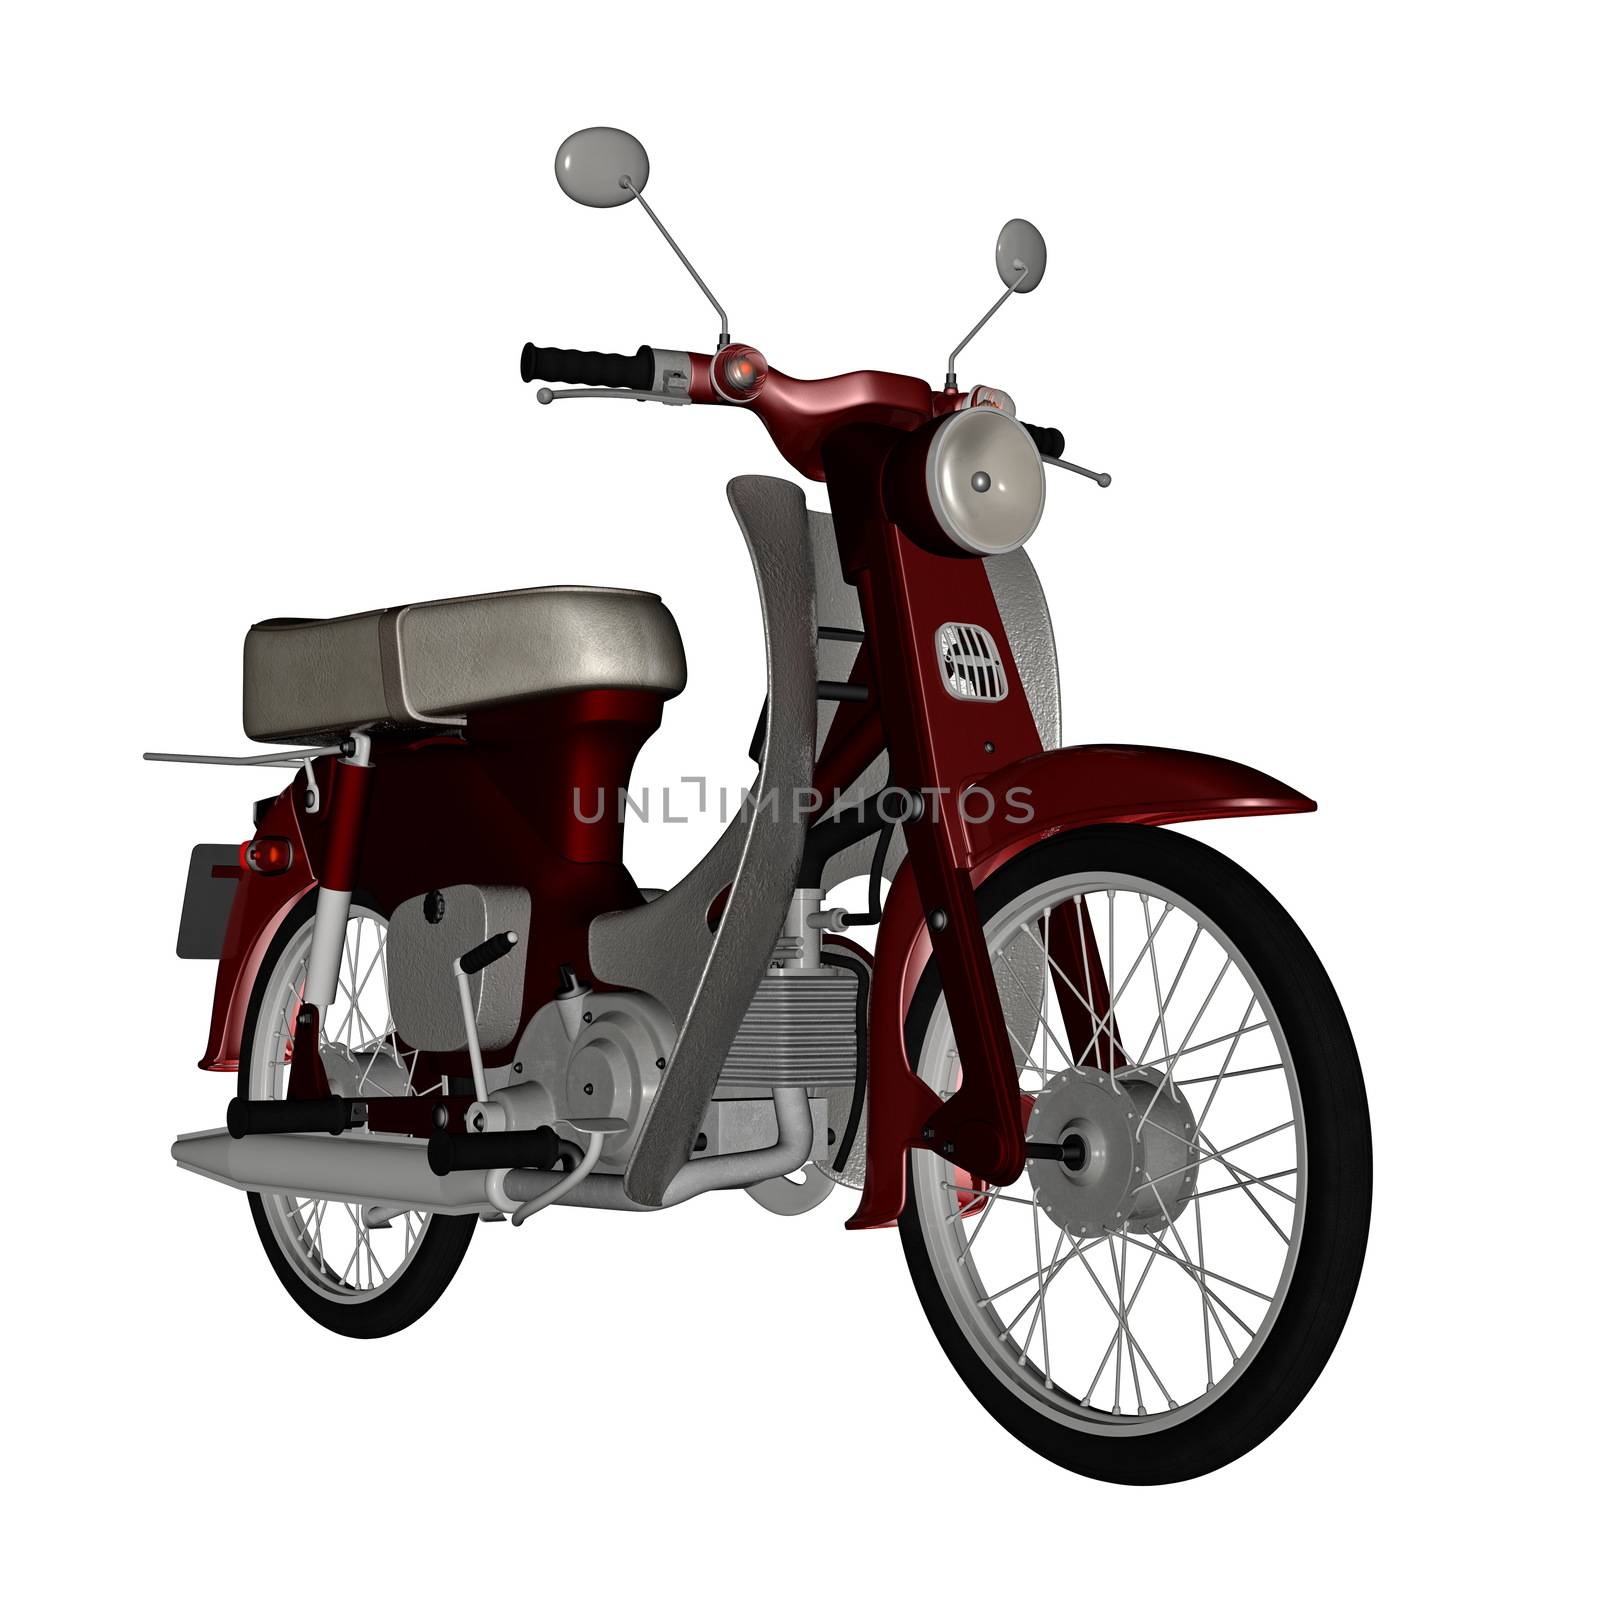 Moped, scooter - 3D render by Elenaphotos21